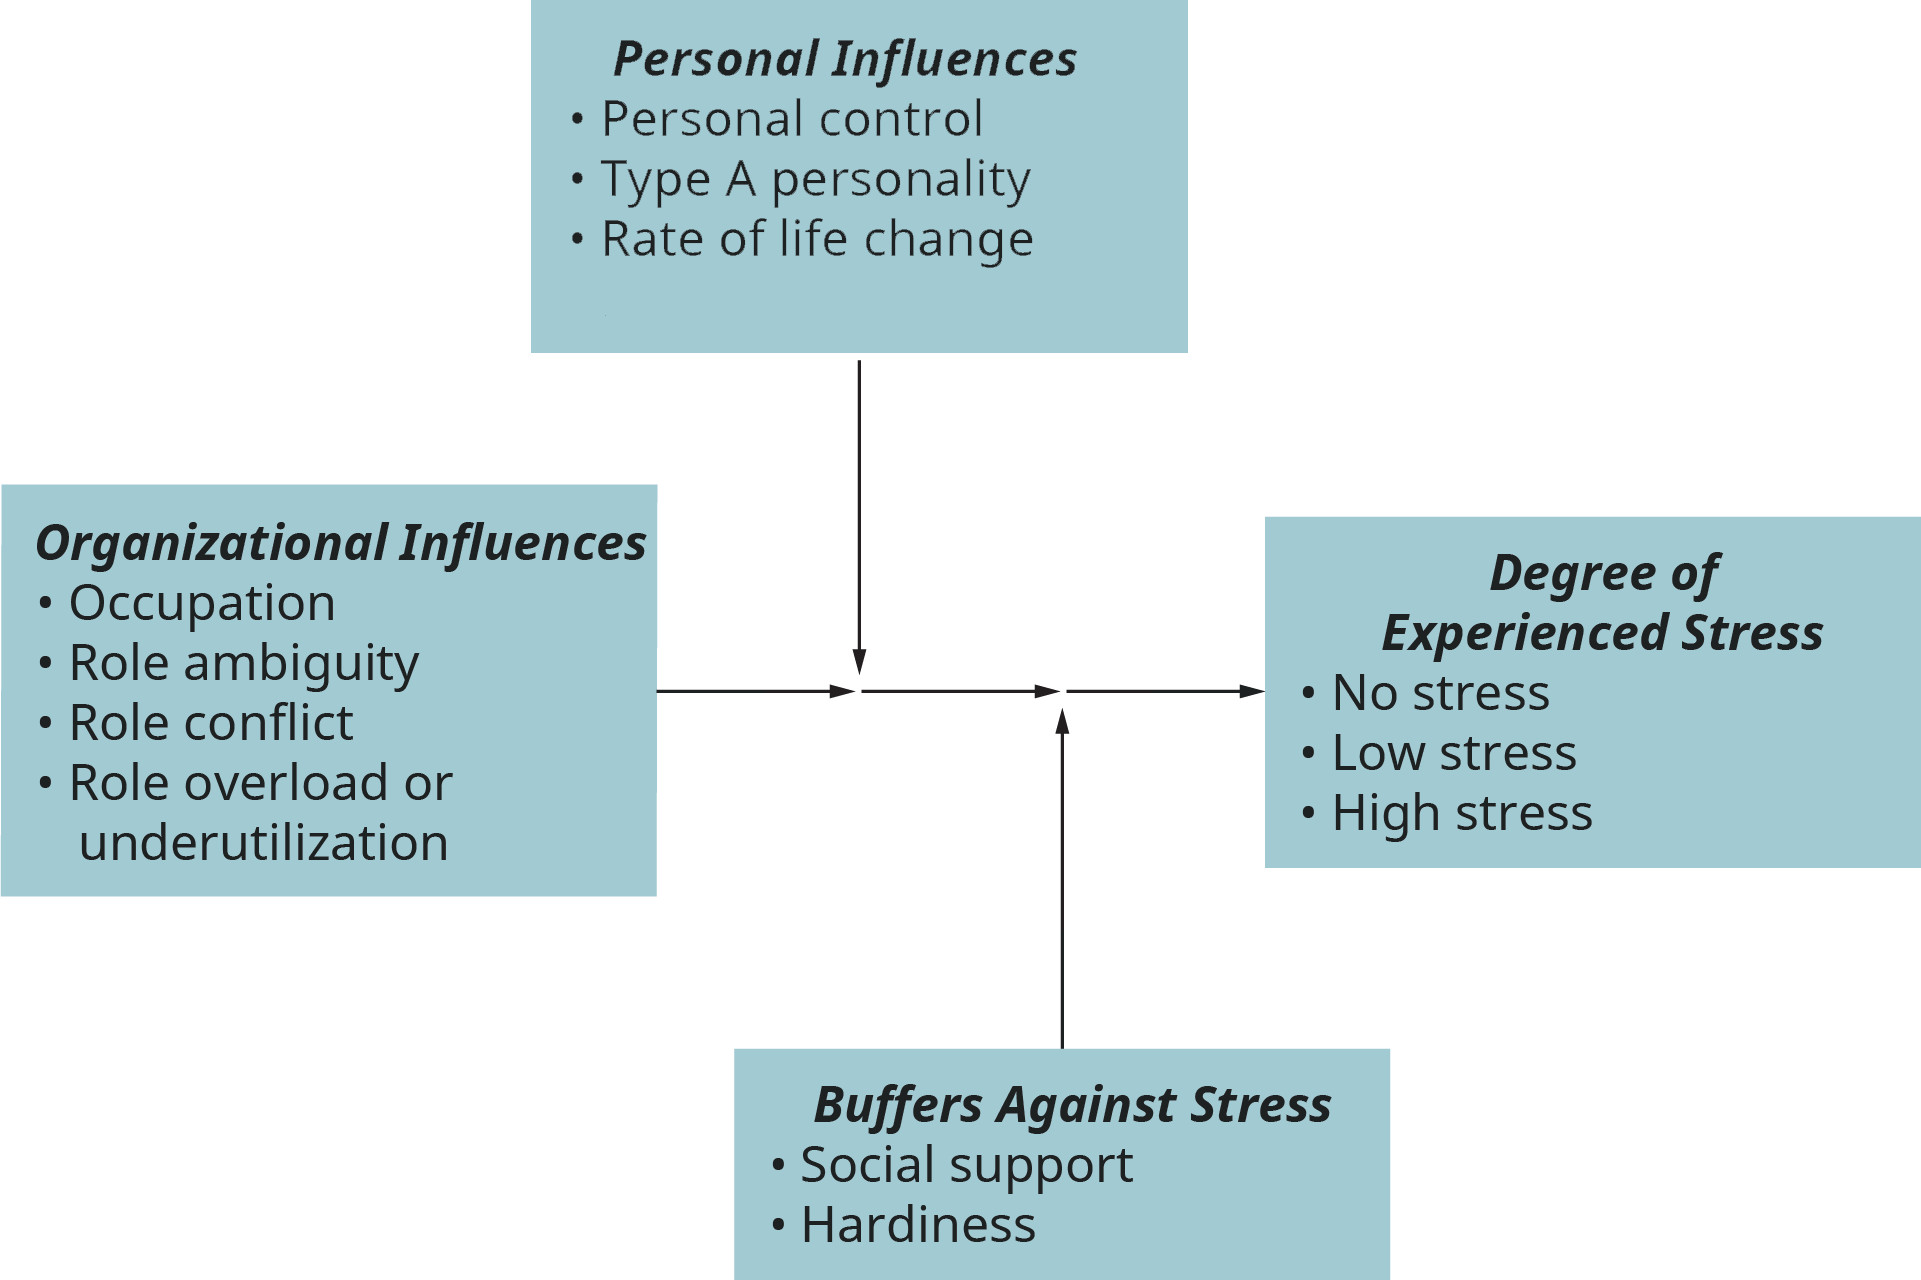 An illustration depicts the major influences on job-related stress, buffering effects on work-related stress, and the degree of experienced stress.